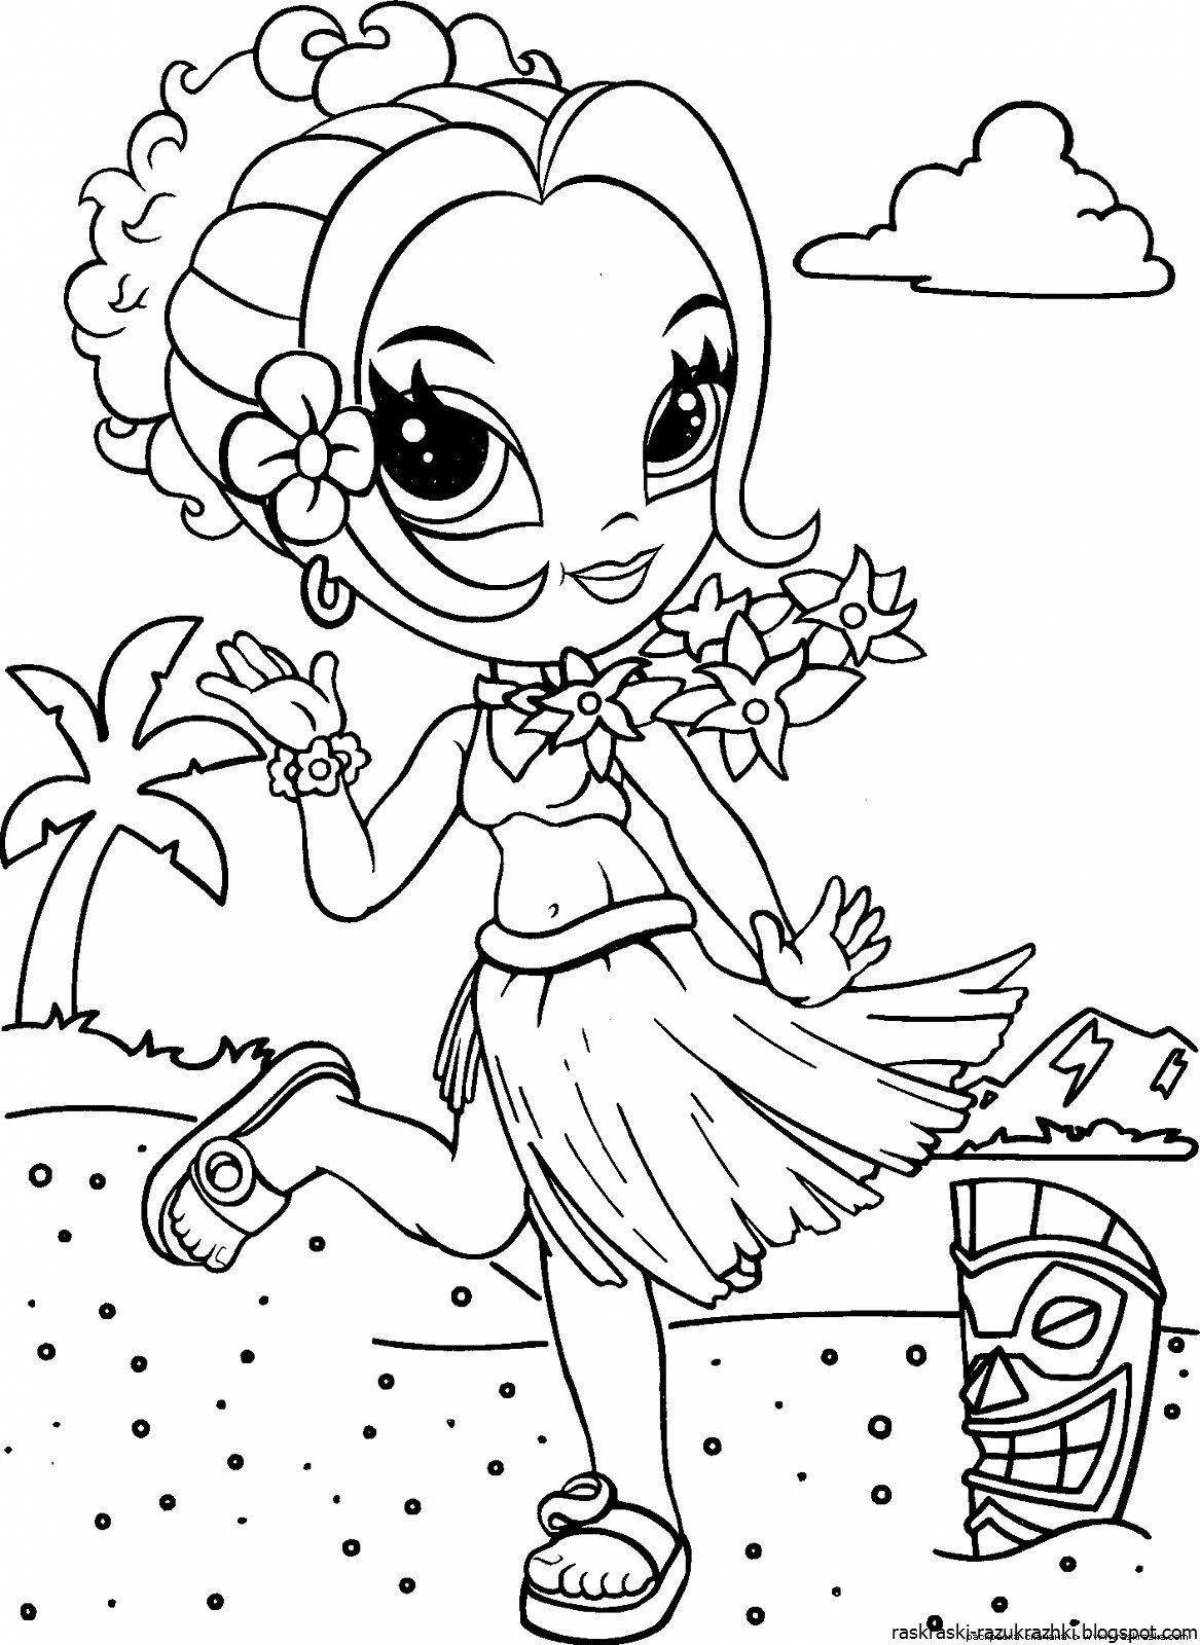 A fun coloring game for girls 9-10 years old